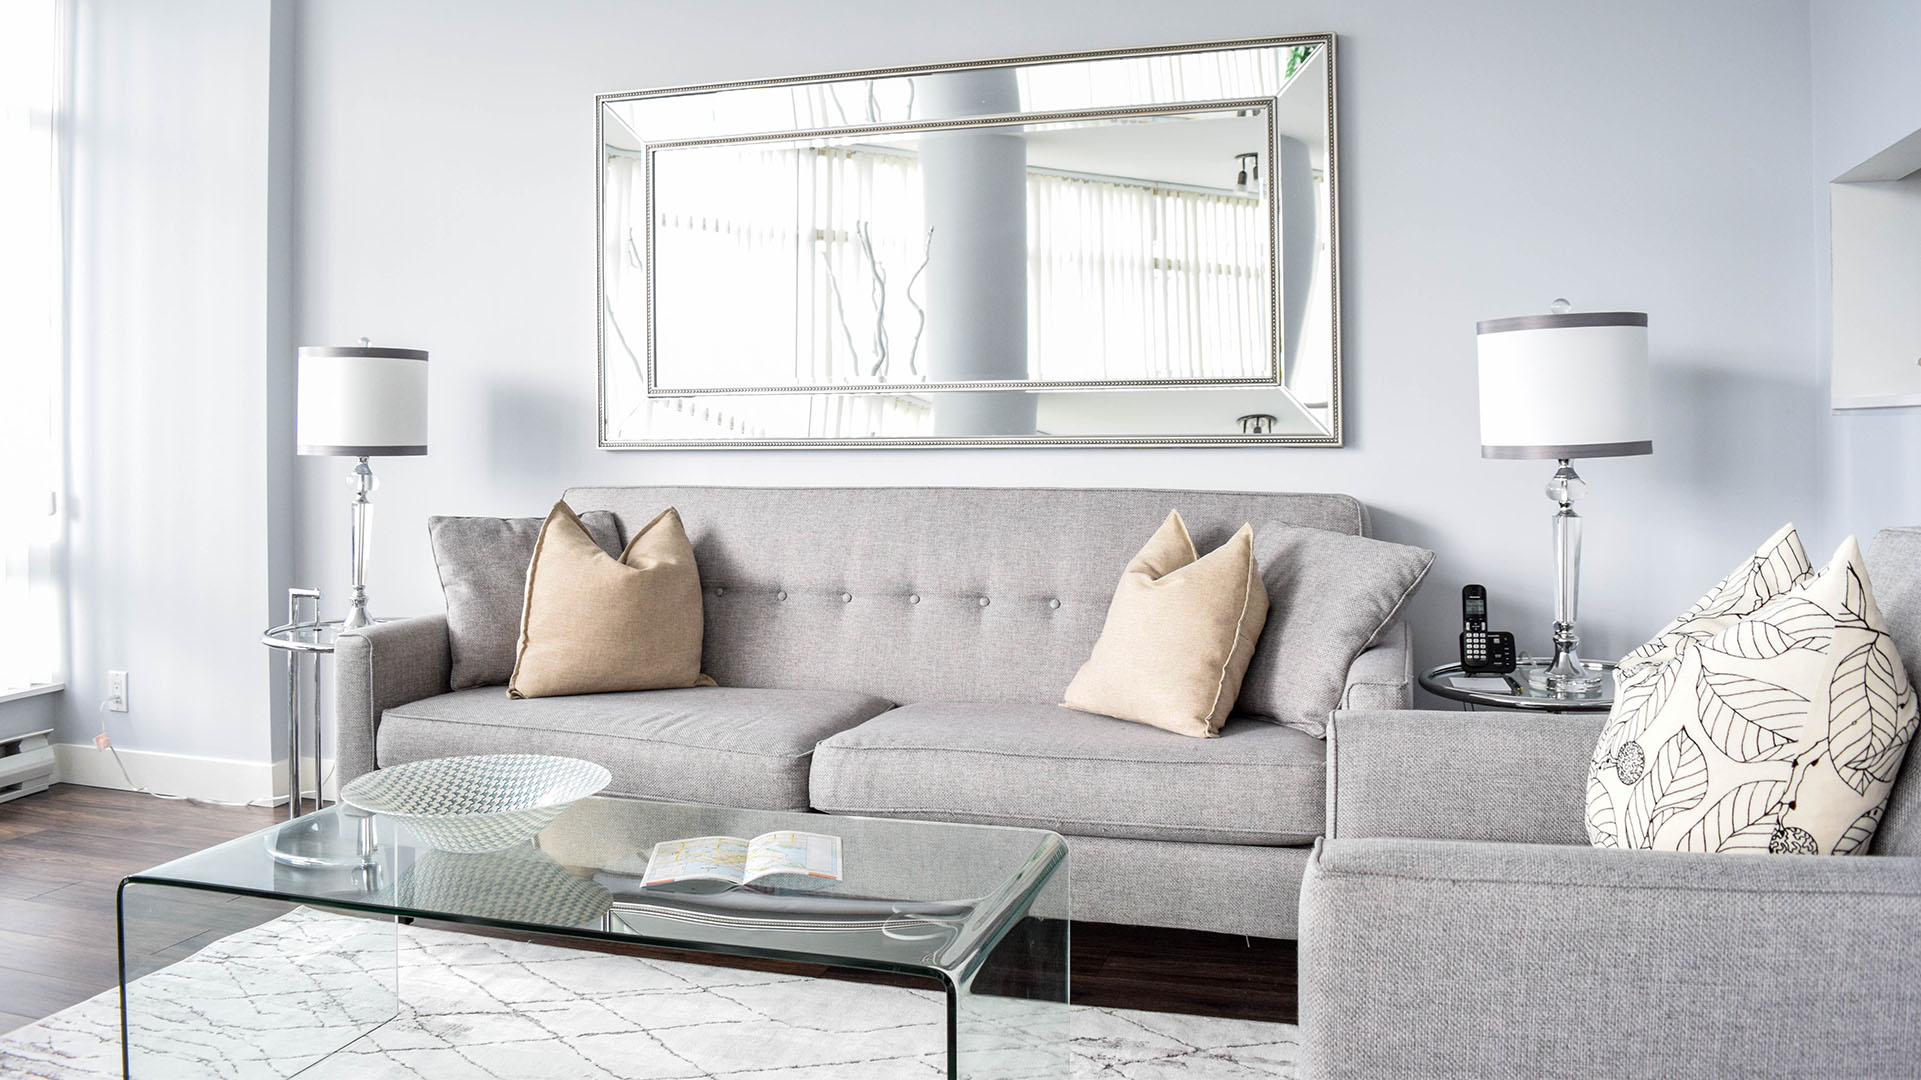 Grey sofa, glass coffee table, and a wall mirror in the living room of apartment 902-1288 Alberni St. at the Palisades.